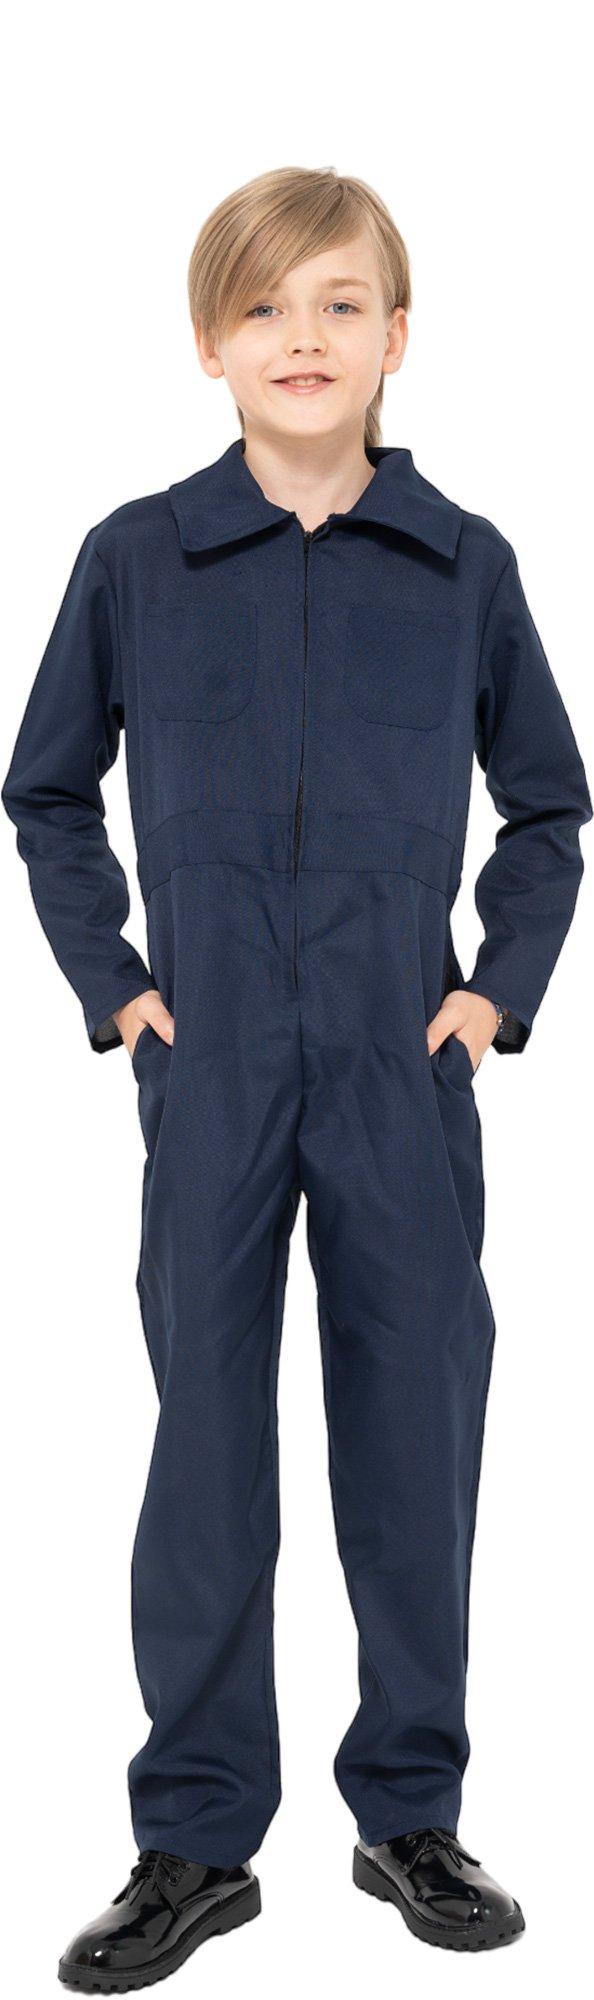 Kids' Killer Coveralls | Party City